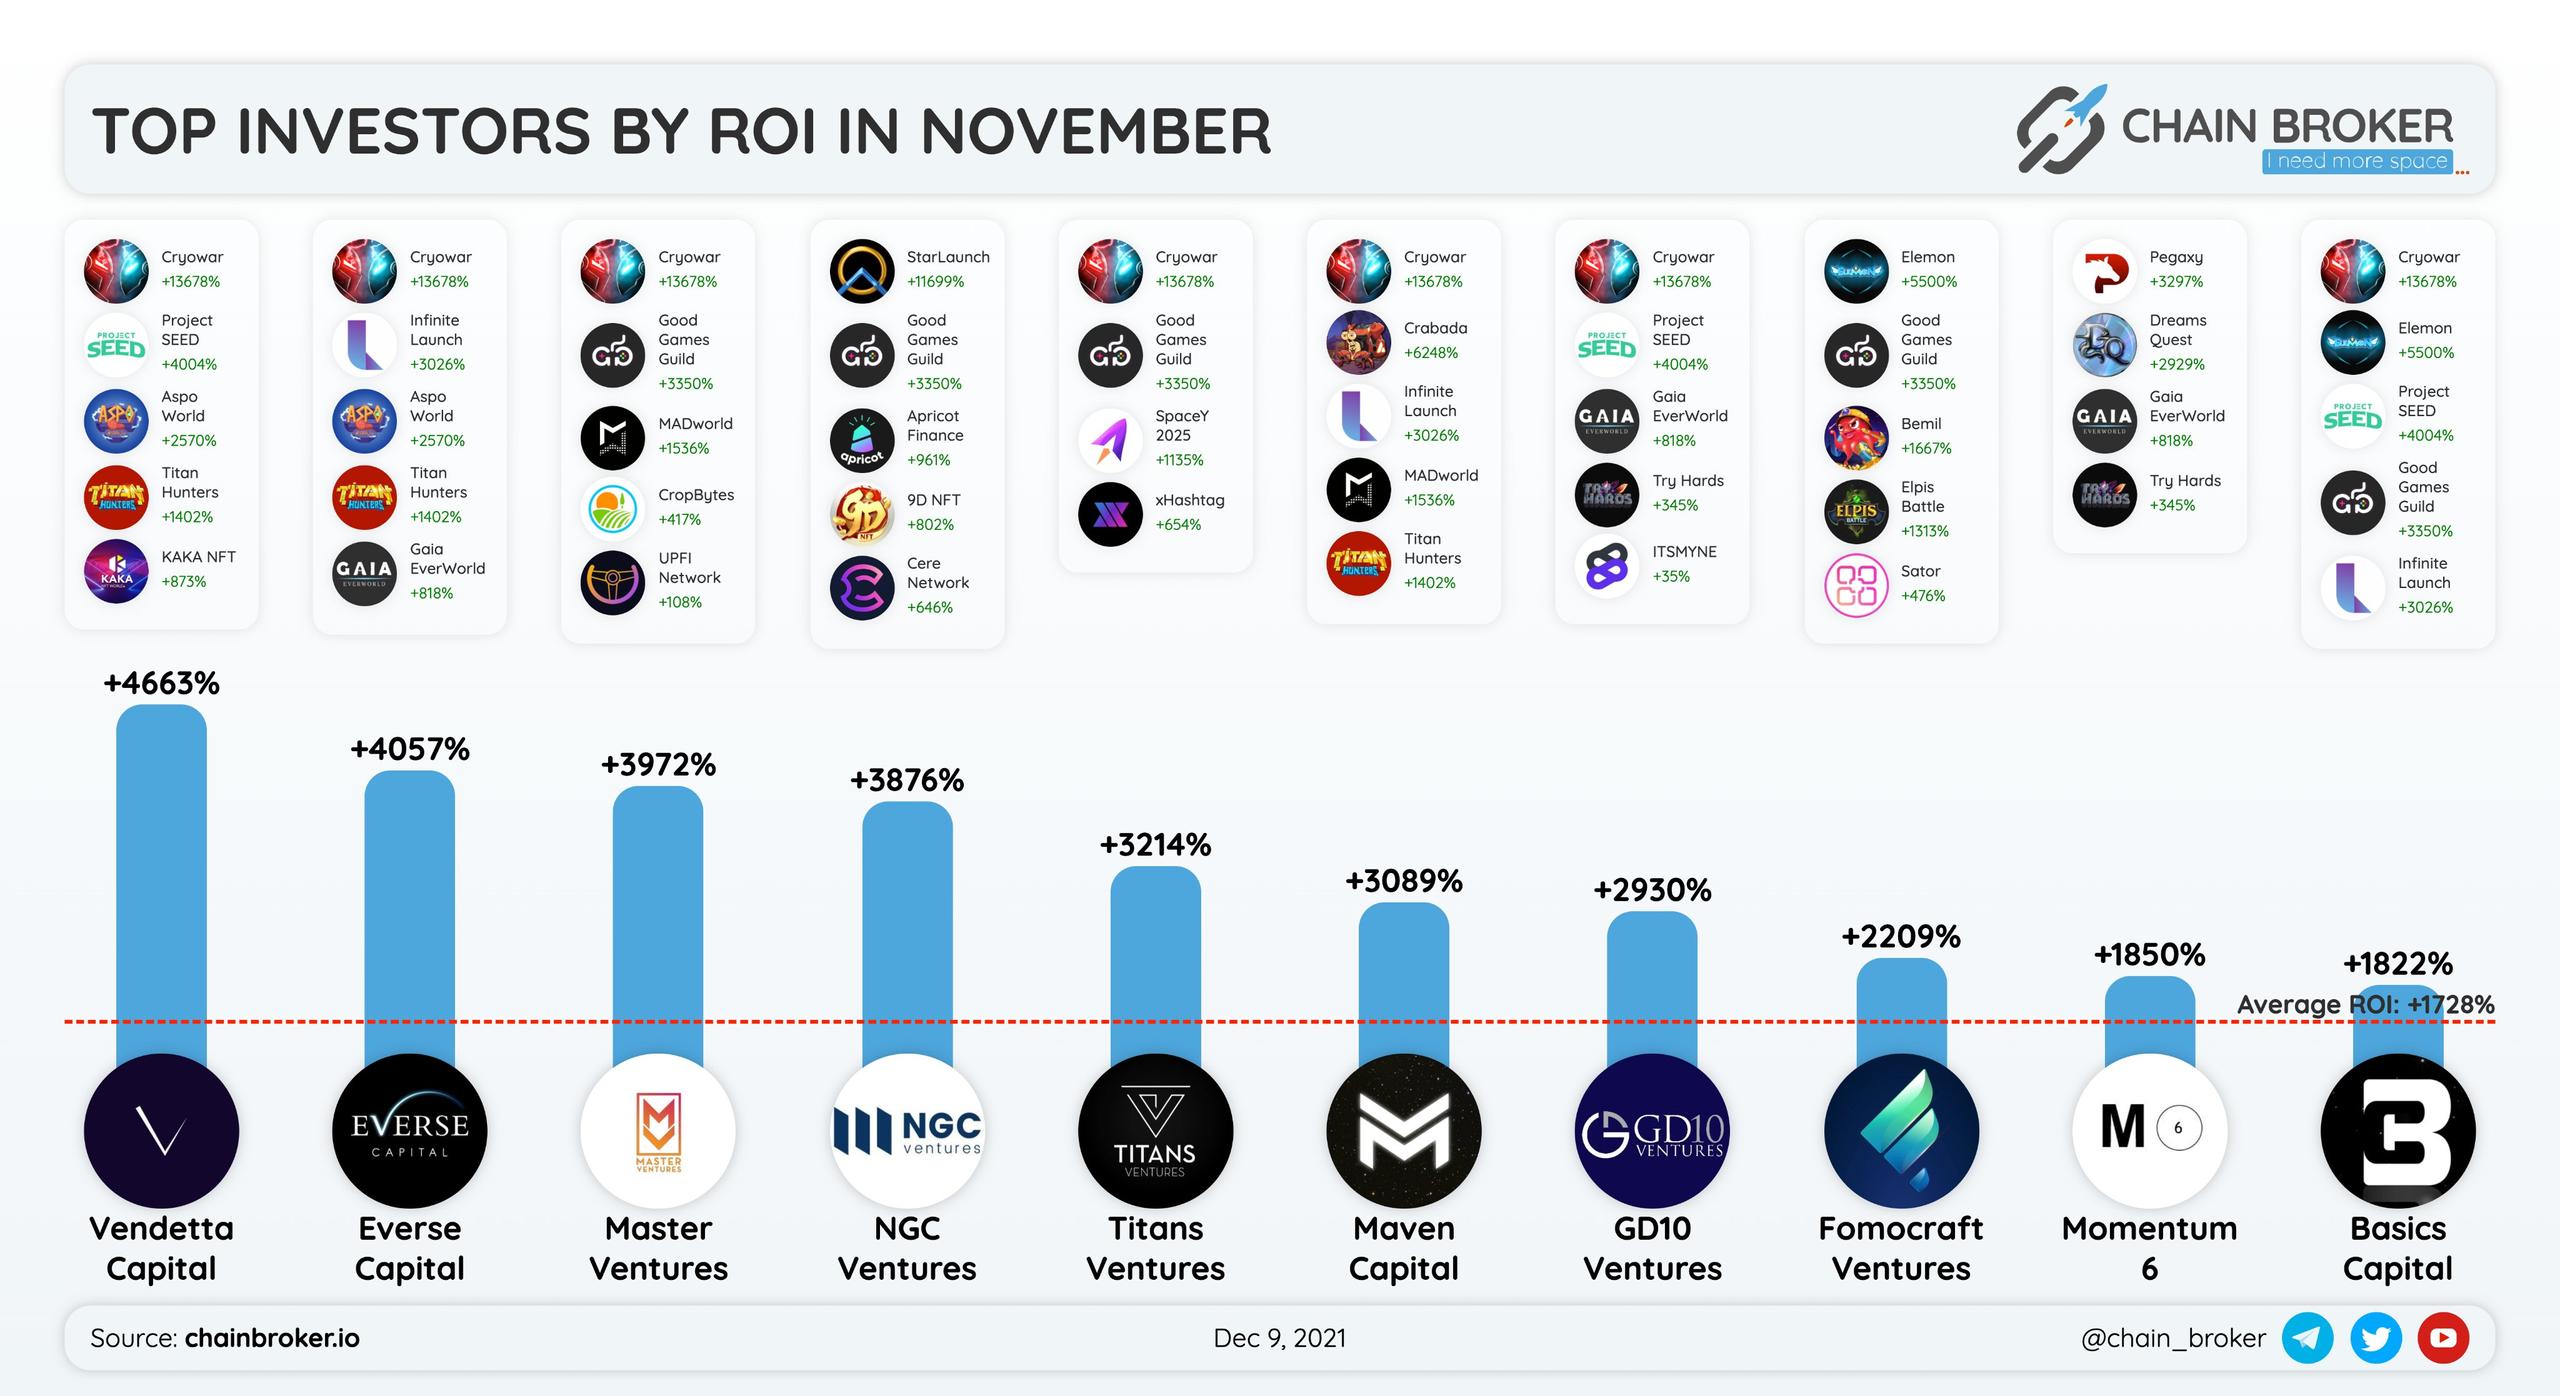 Top investors by project ROI listed in November